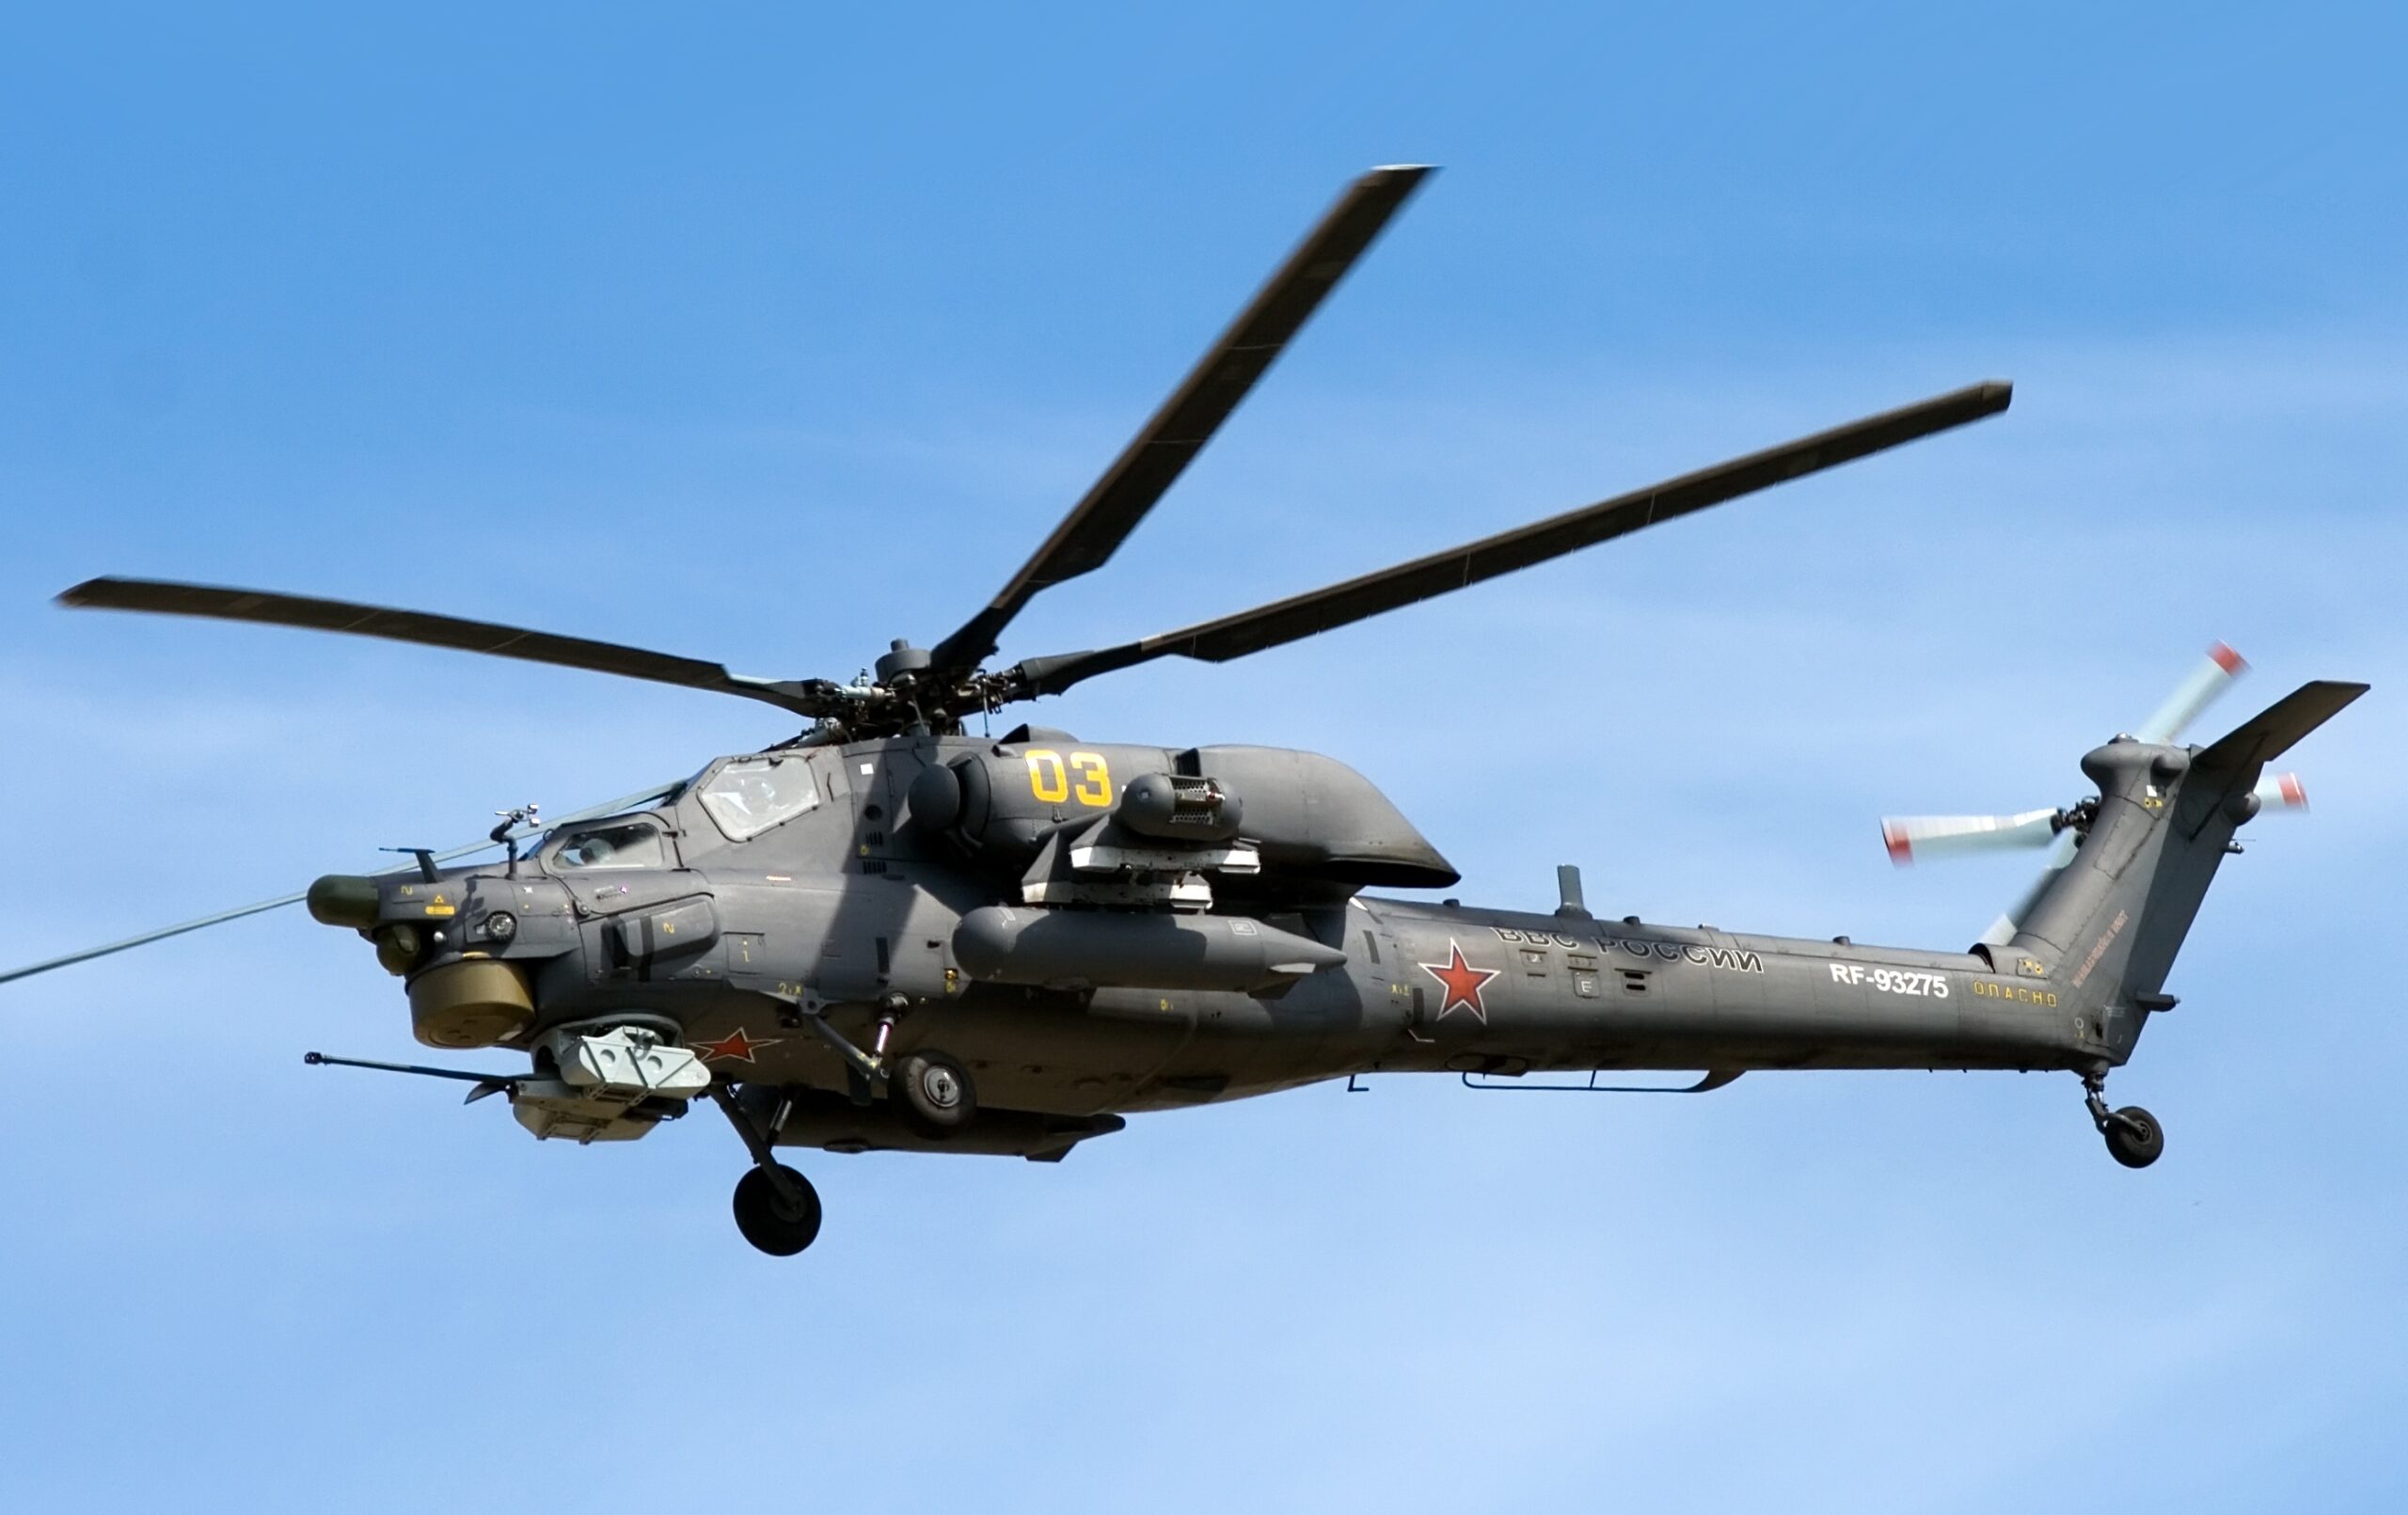 A Mil Mi-28 helicopter is seen hovering on the clear blue sky. On its gray-green hull, the number "03" is painted in yellow, as well as two red stars and the unit name "RF-93275" in white. Some characters on the Russian alphabet are also painted in black.